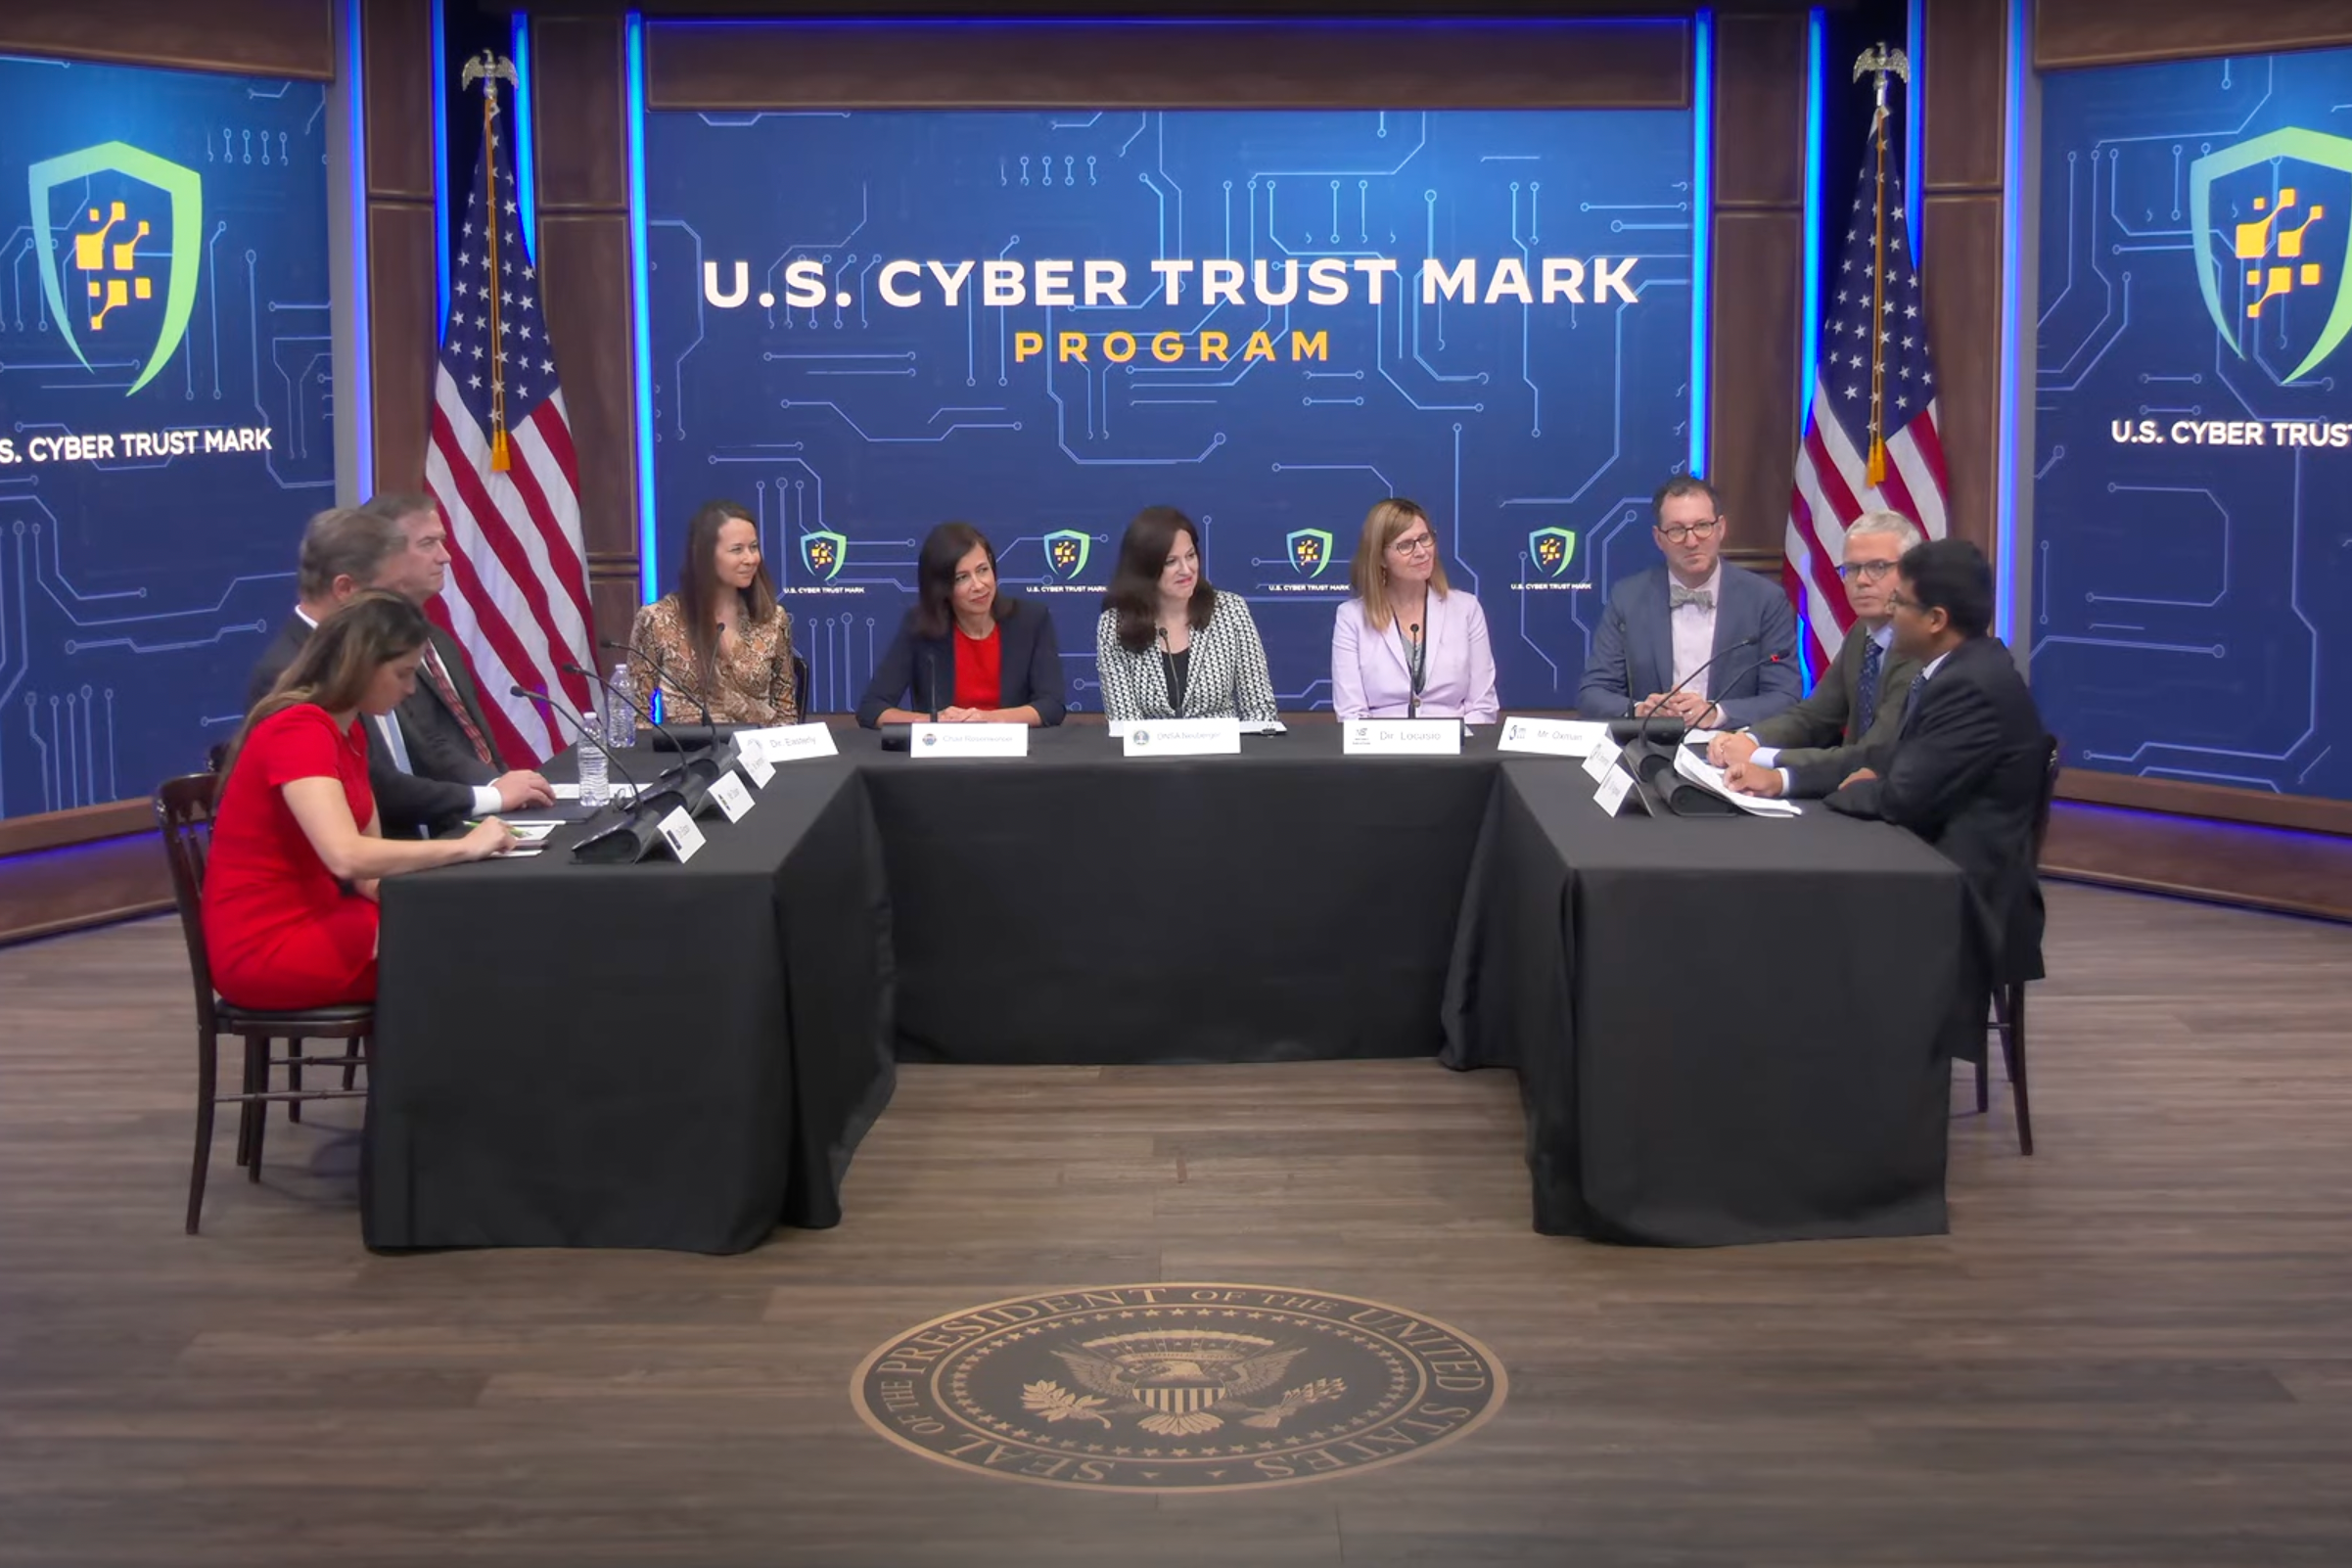 Stillframe of the livestreamed event showing a dozen or so people gathered around a semi circular conference table, the signage in the background reads "US Cyber Trust Mark"